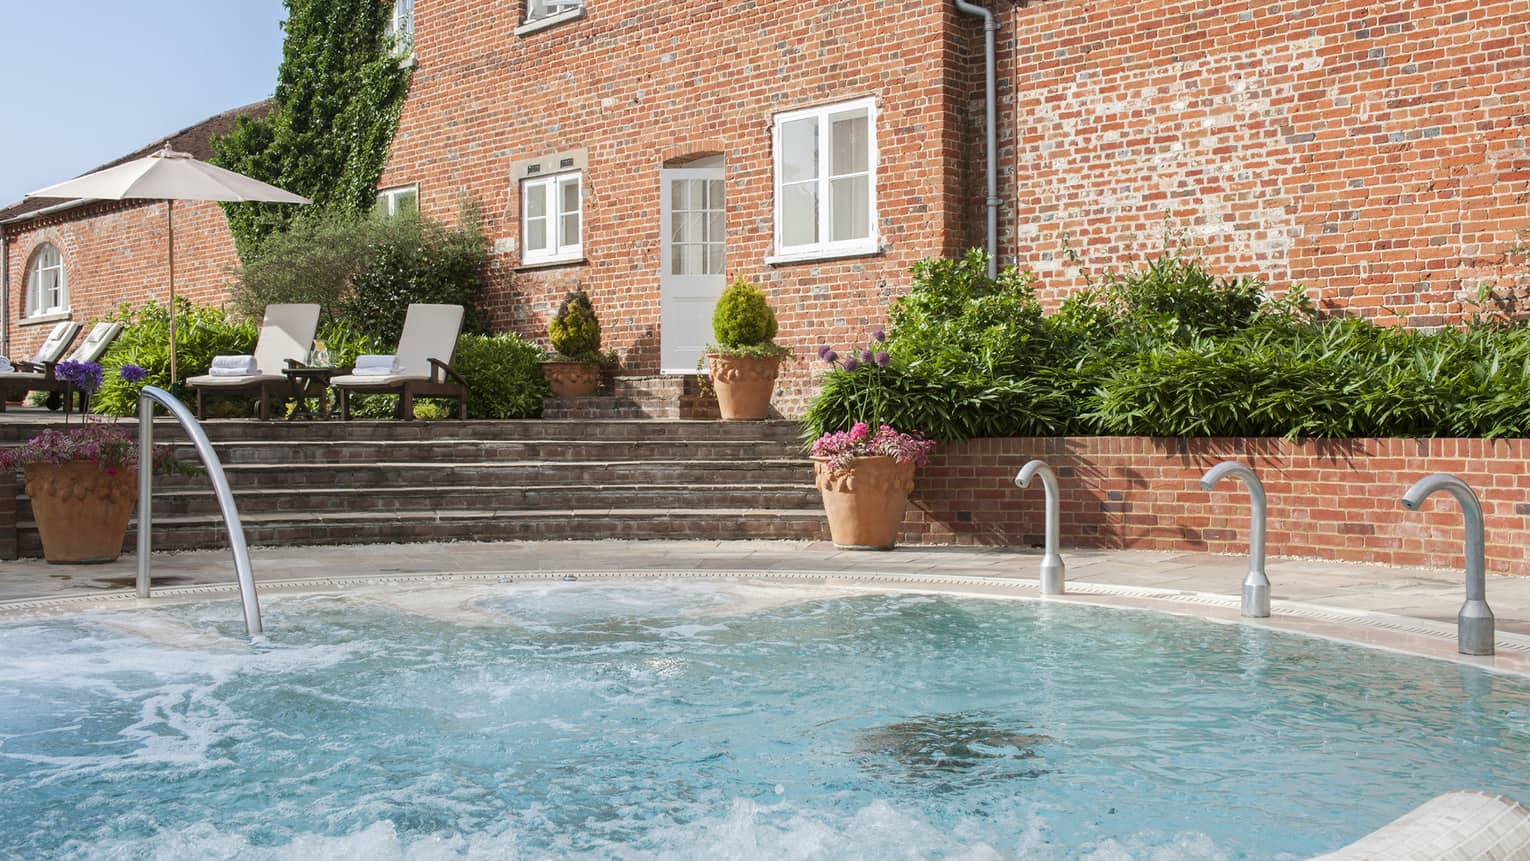 Outdoor swimming pool and steps under red brick hotel exterior on sunny day